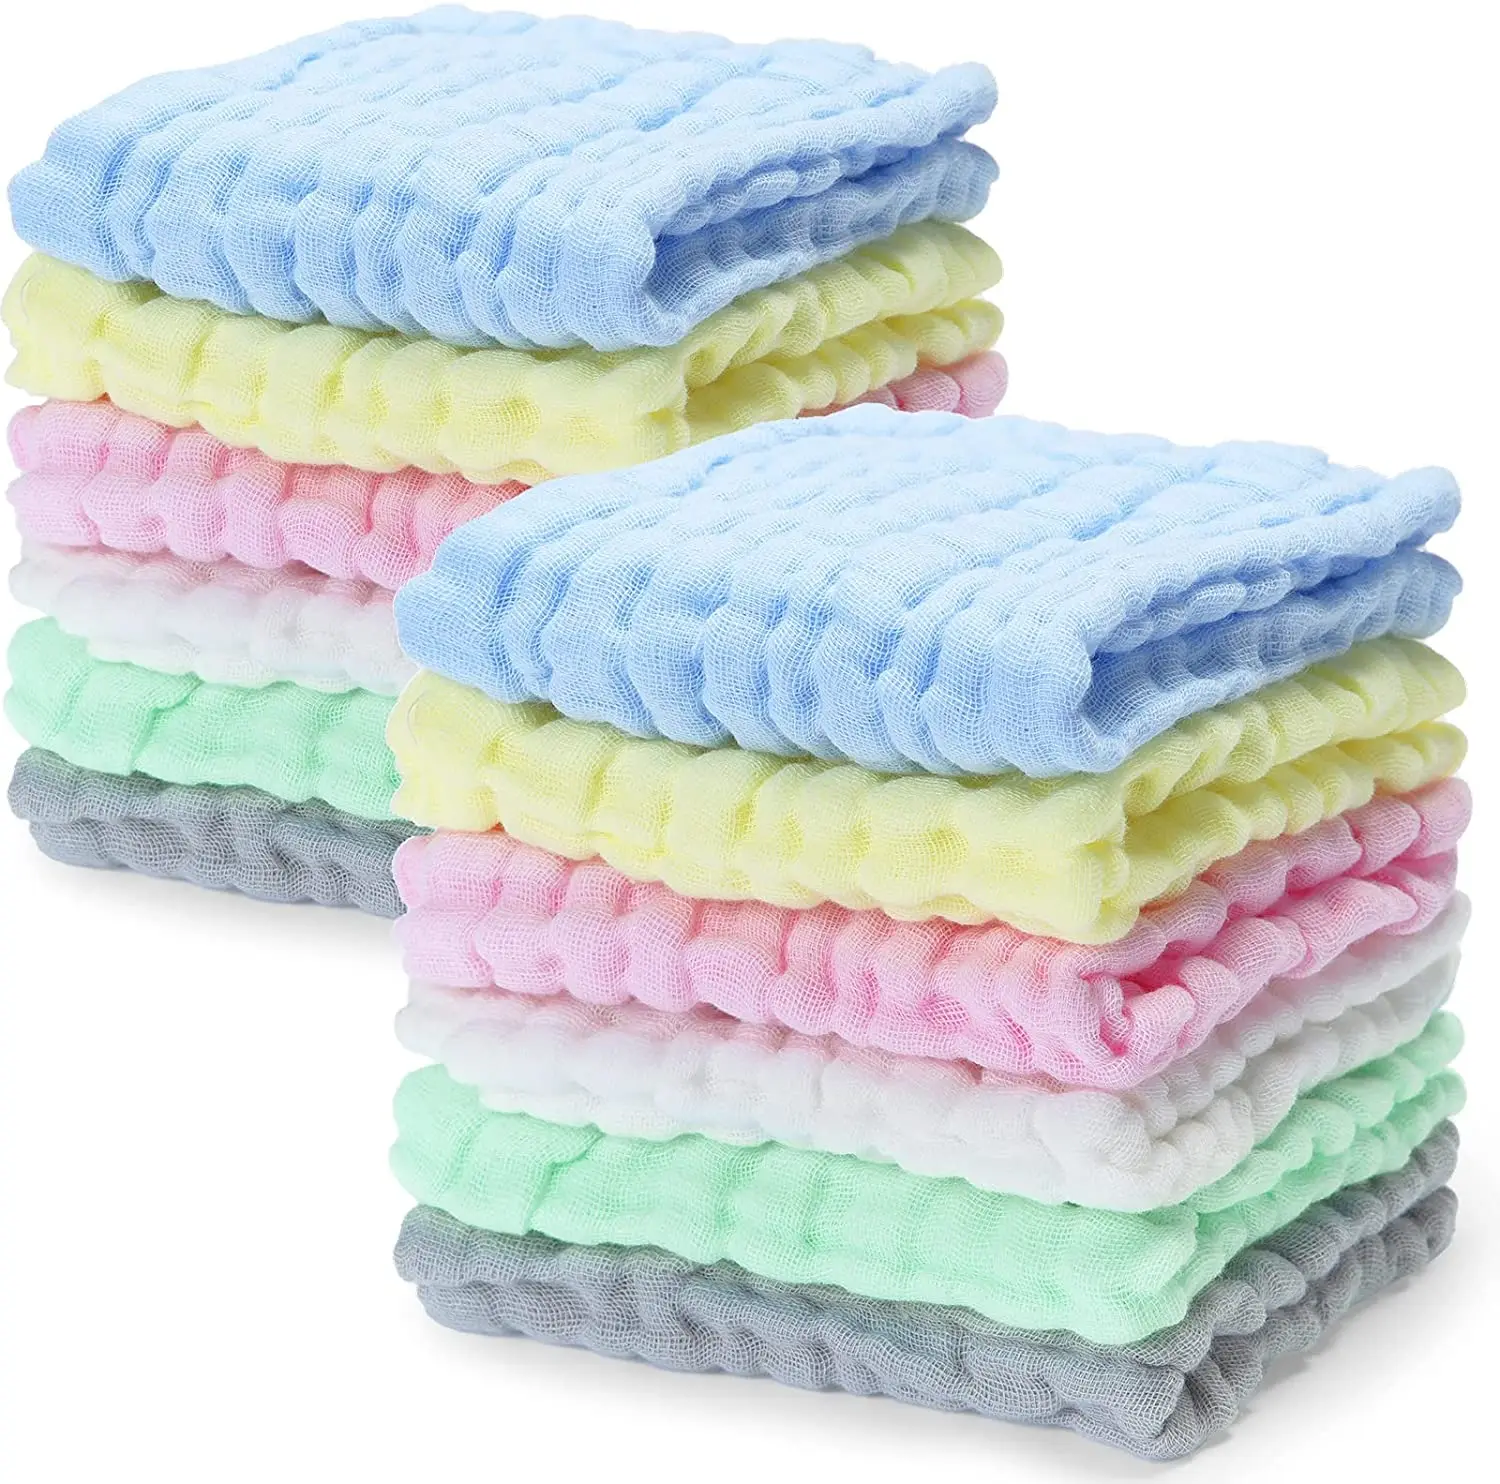 Children's Towel, Face Towel, Washcloth, Absorbent, 1pc, Size 25